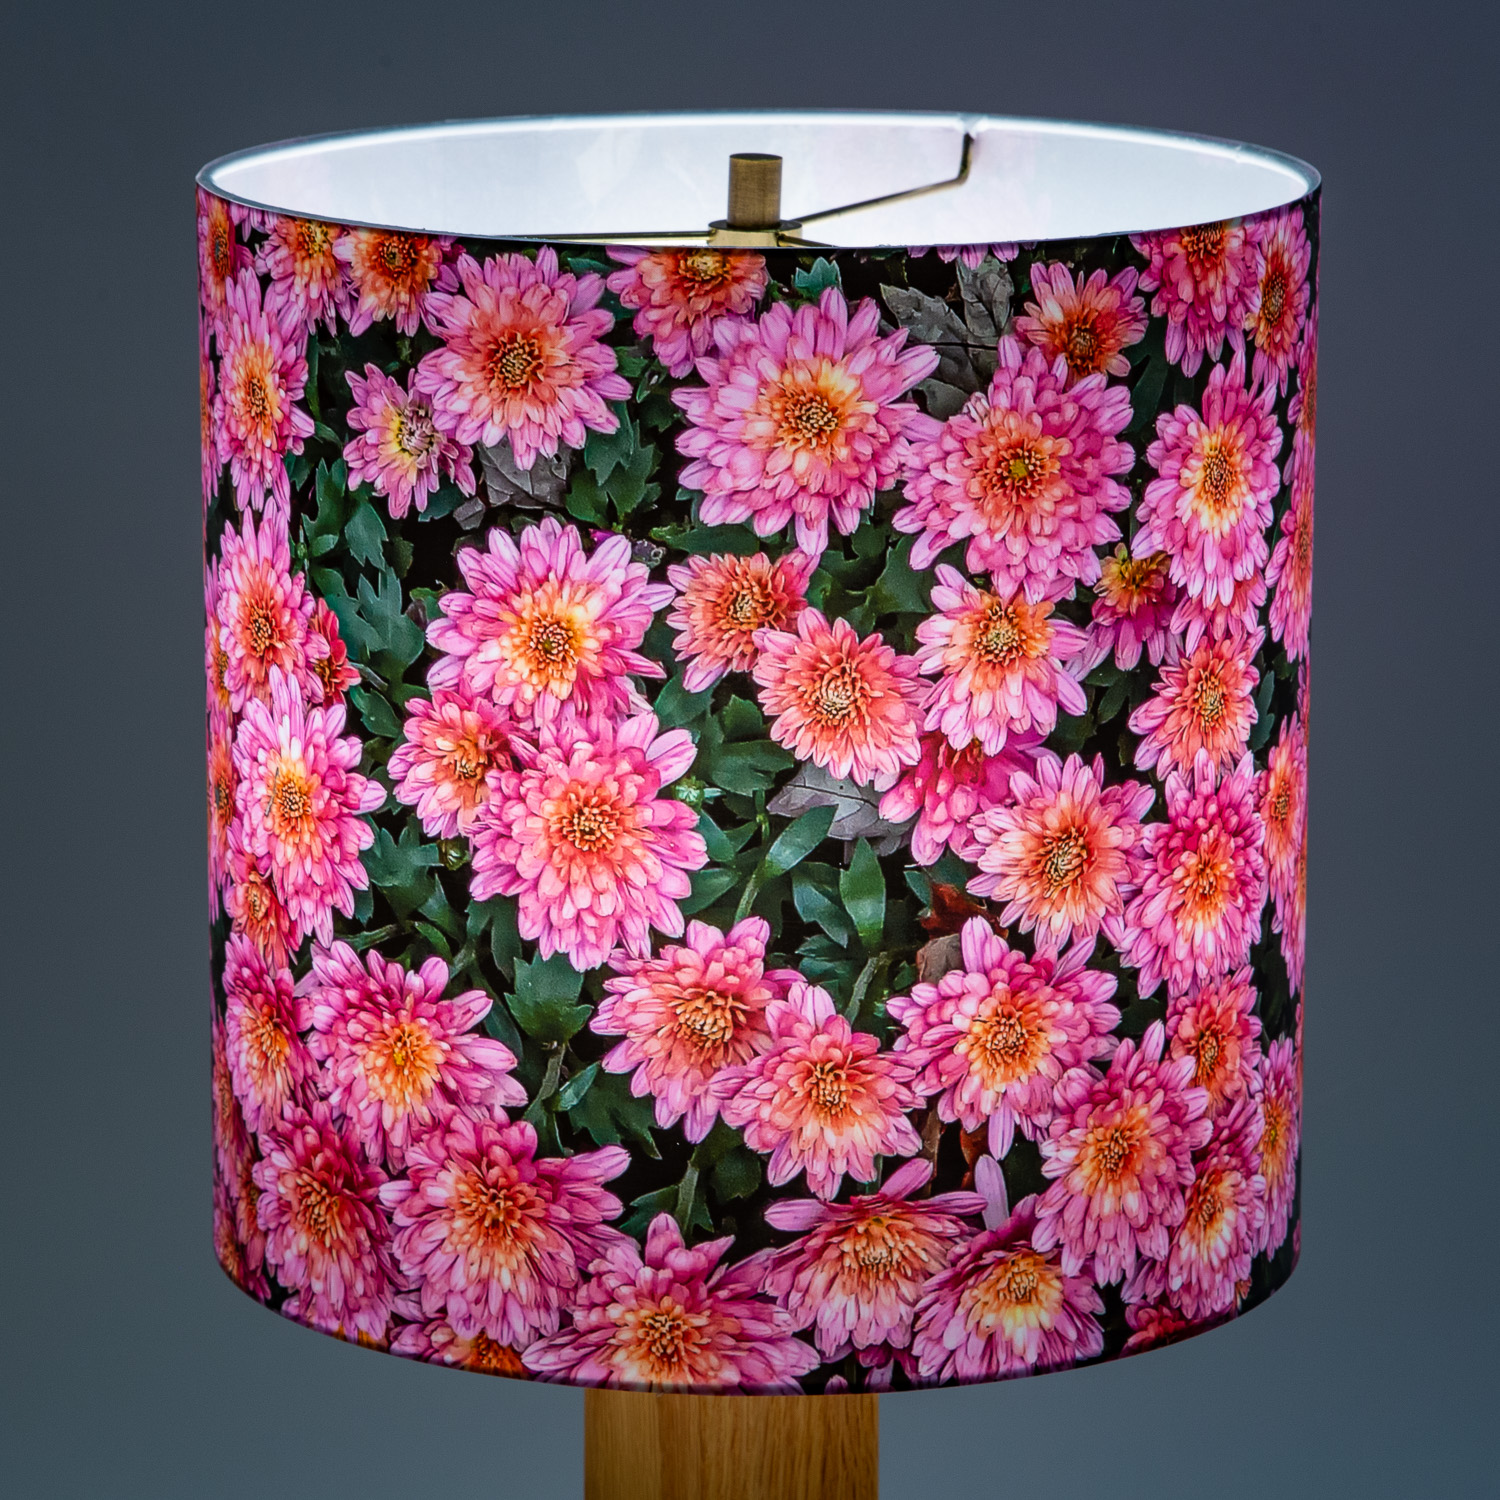 111: Pink Chrysanthemum: Mums are called the 'Queen of Fall Flowers' -- Photo on Lamp shade by David Elmore